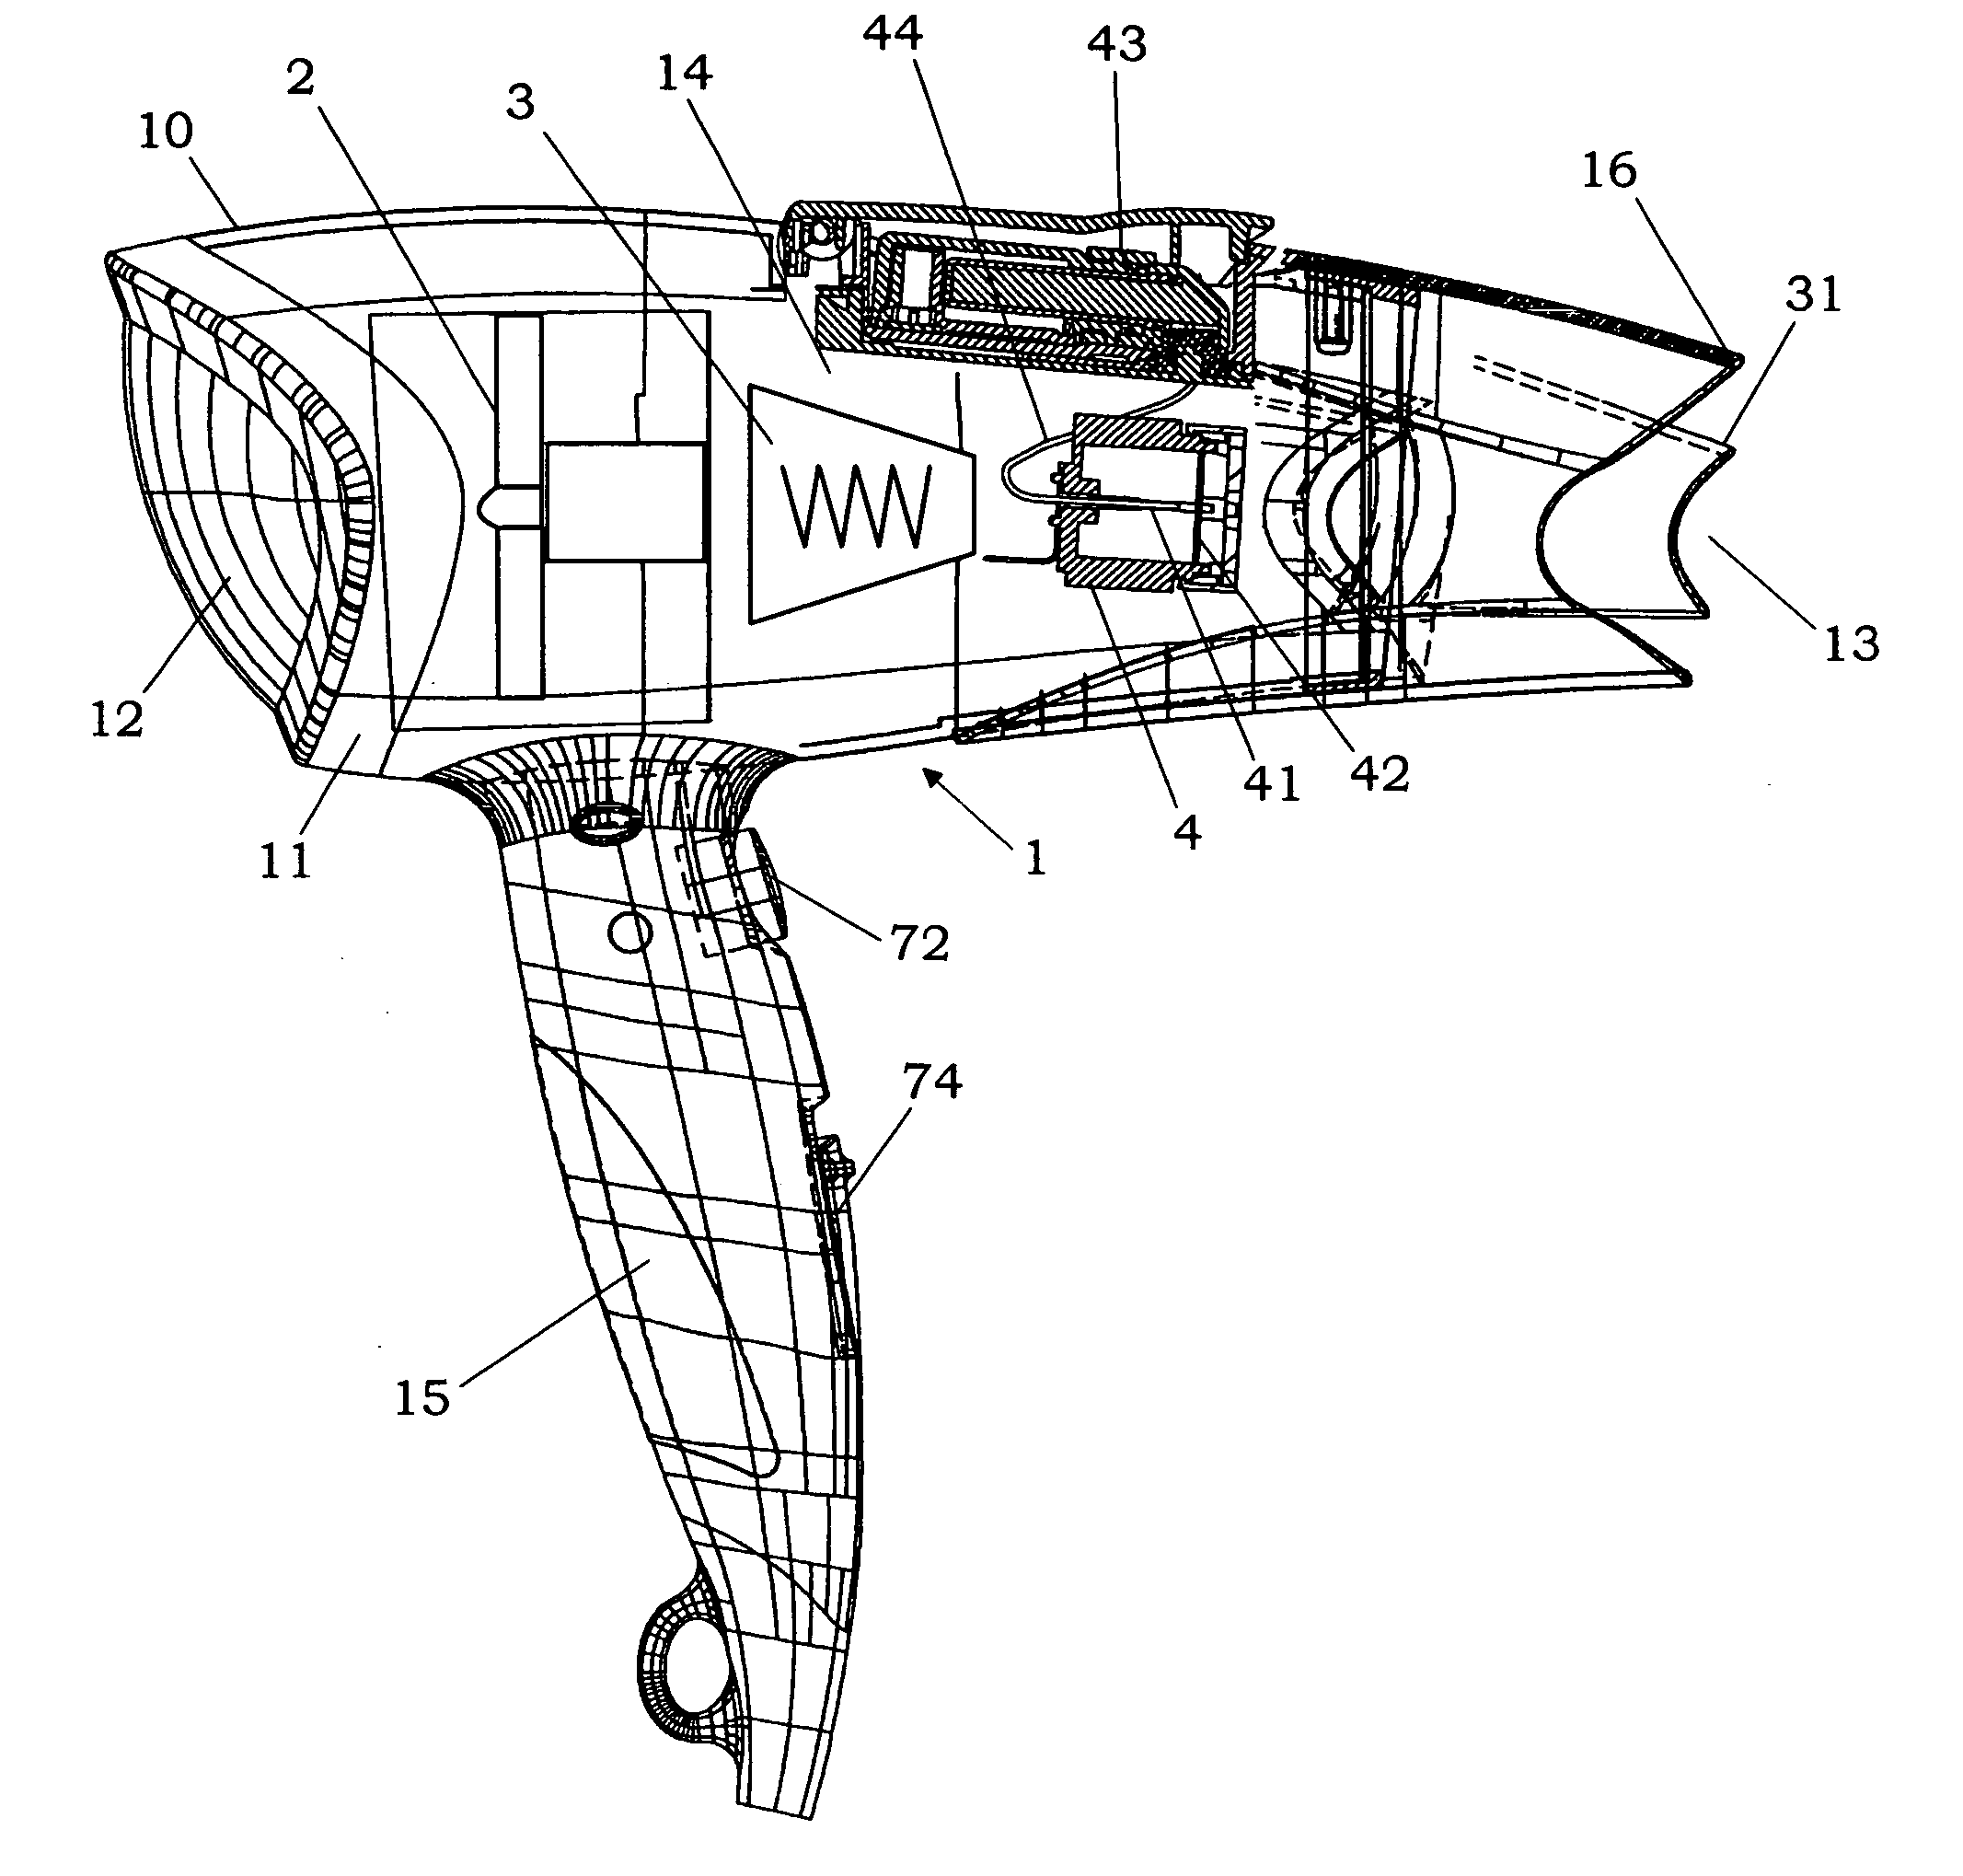 Hair dryer with static atomizing device